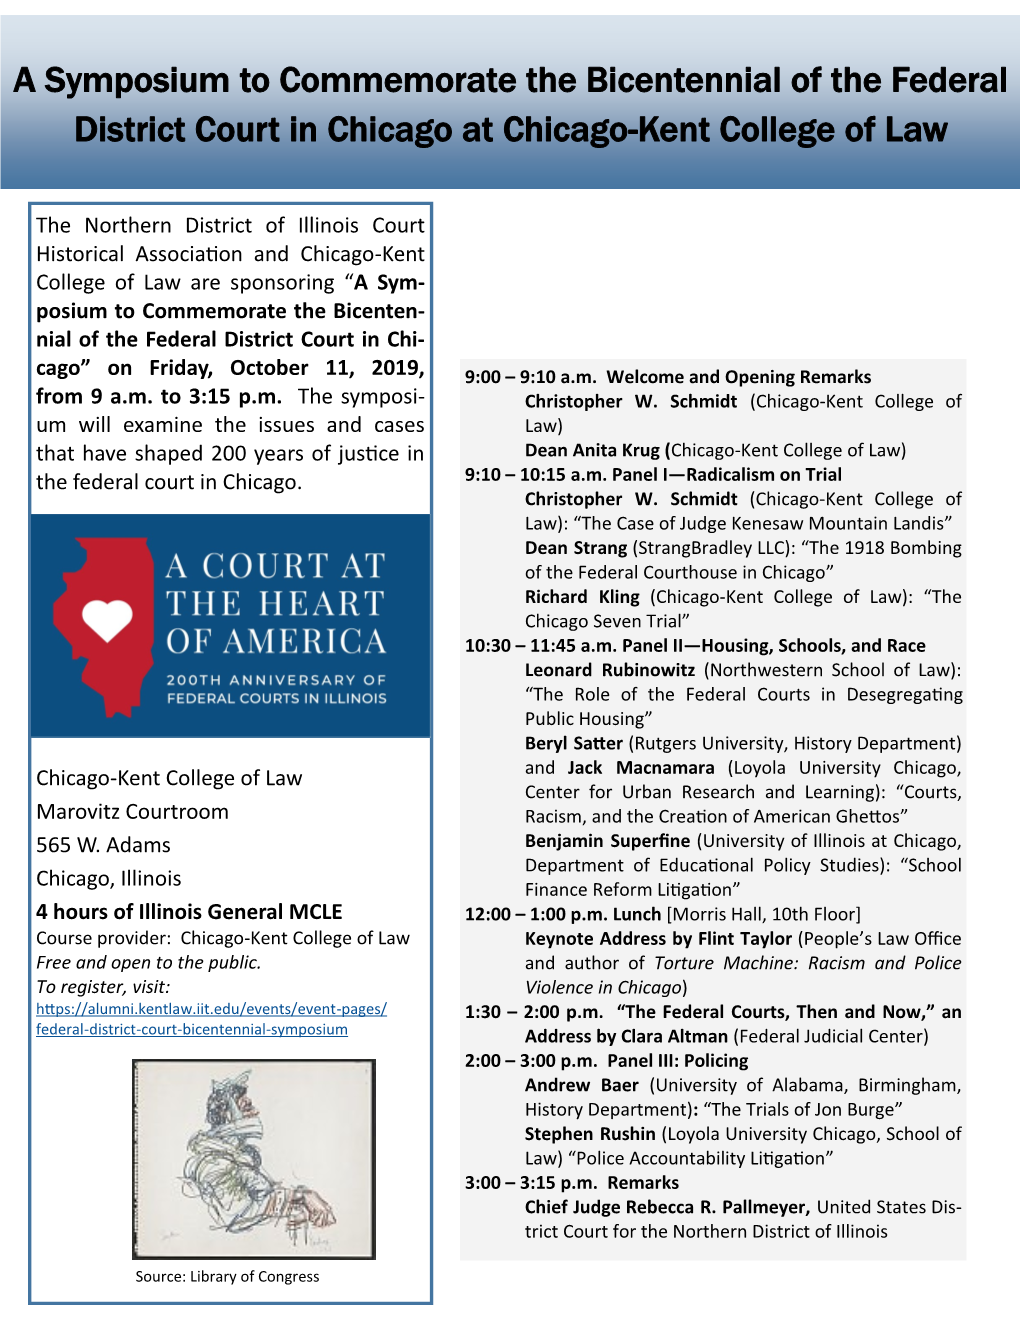 A Symposium to Commemorate the Bicentennial of the Federal District Court in Chicago at Chicago-Kent College of Law